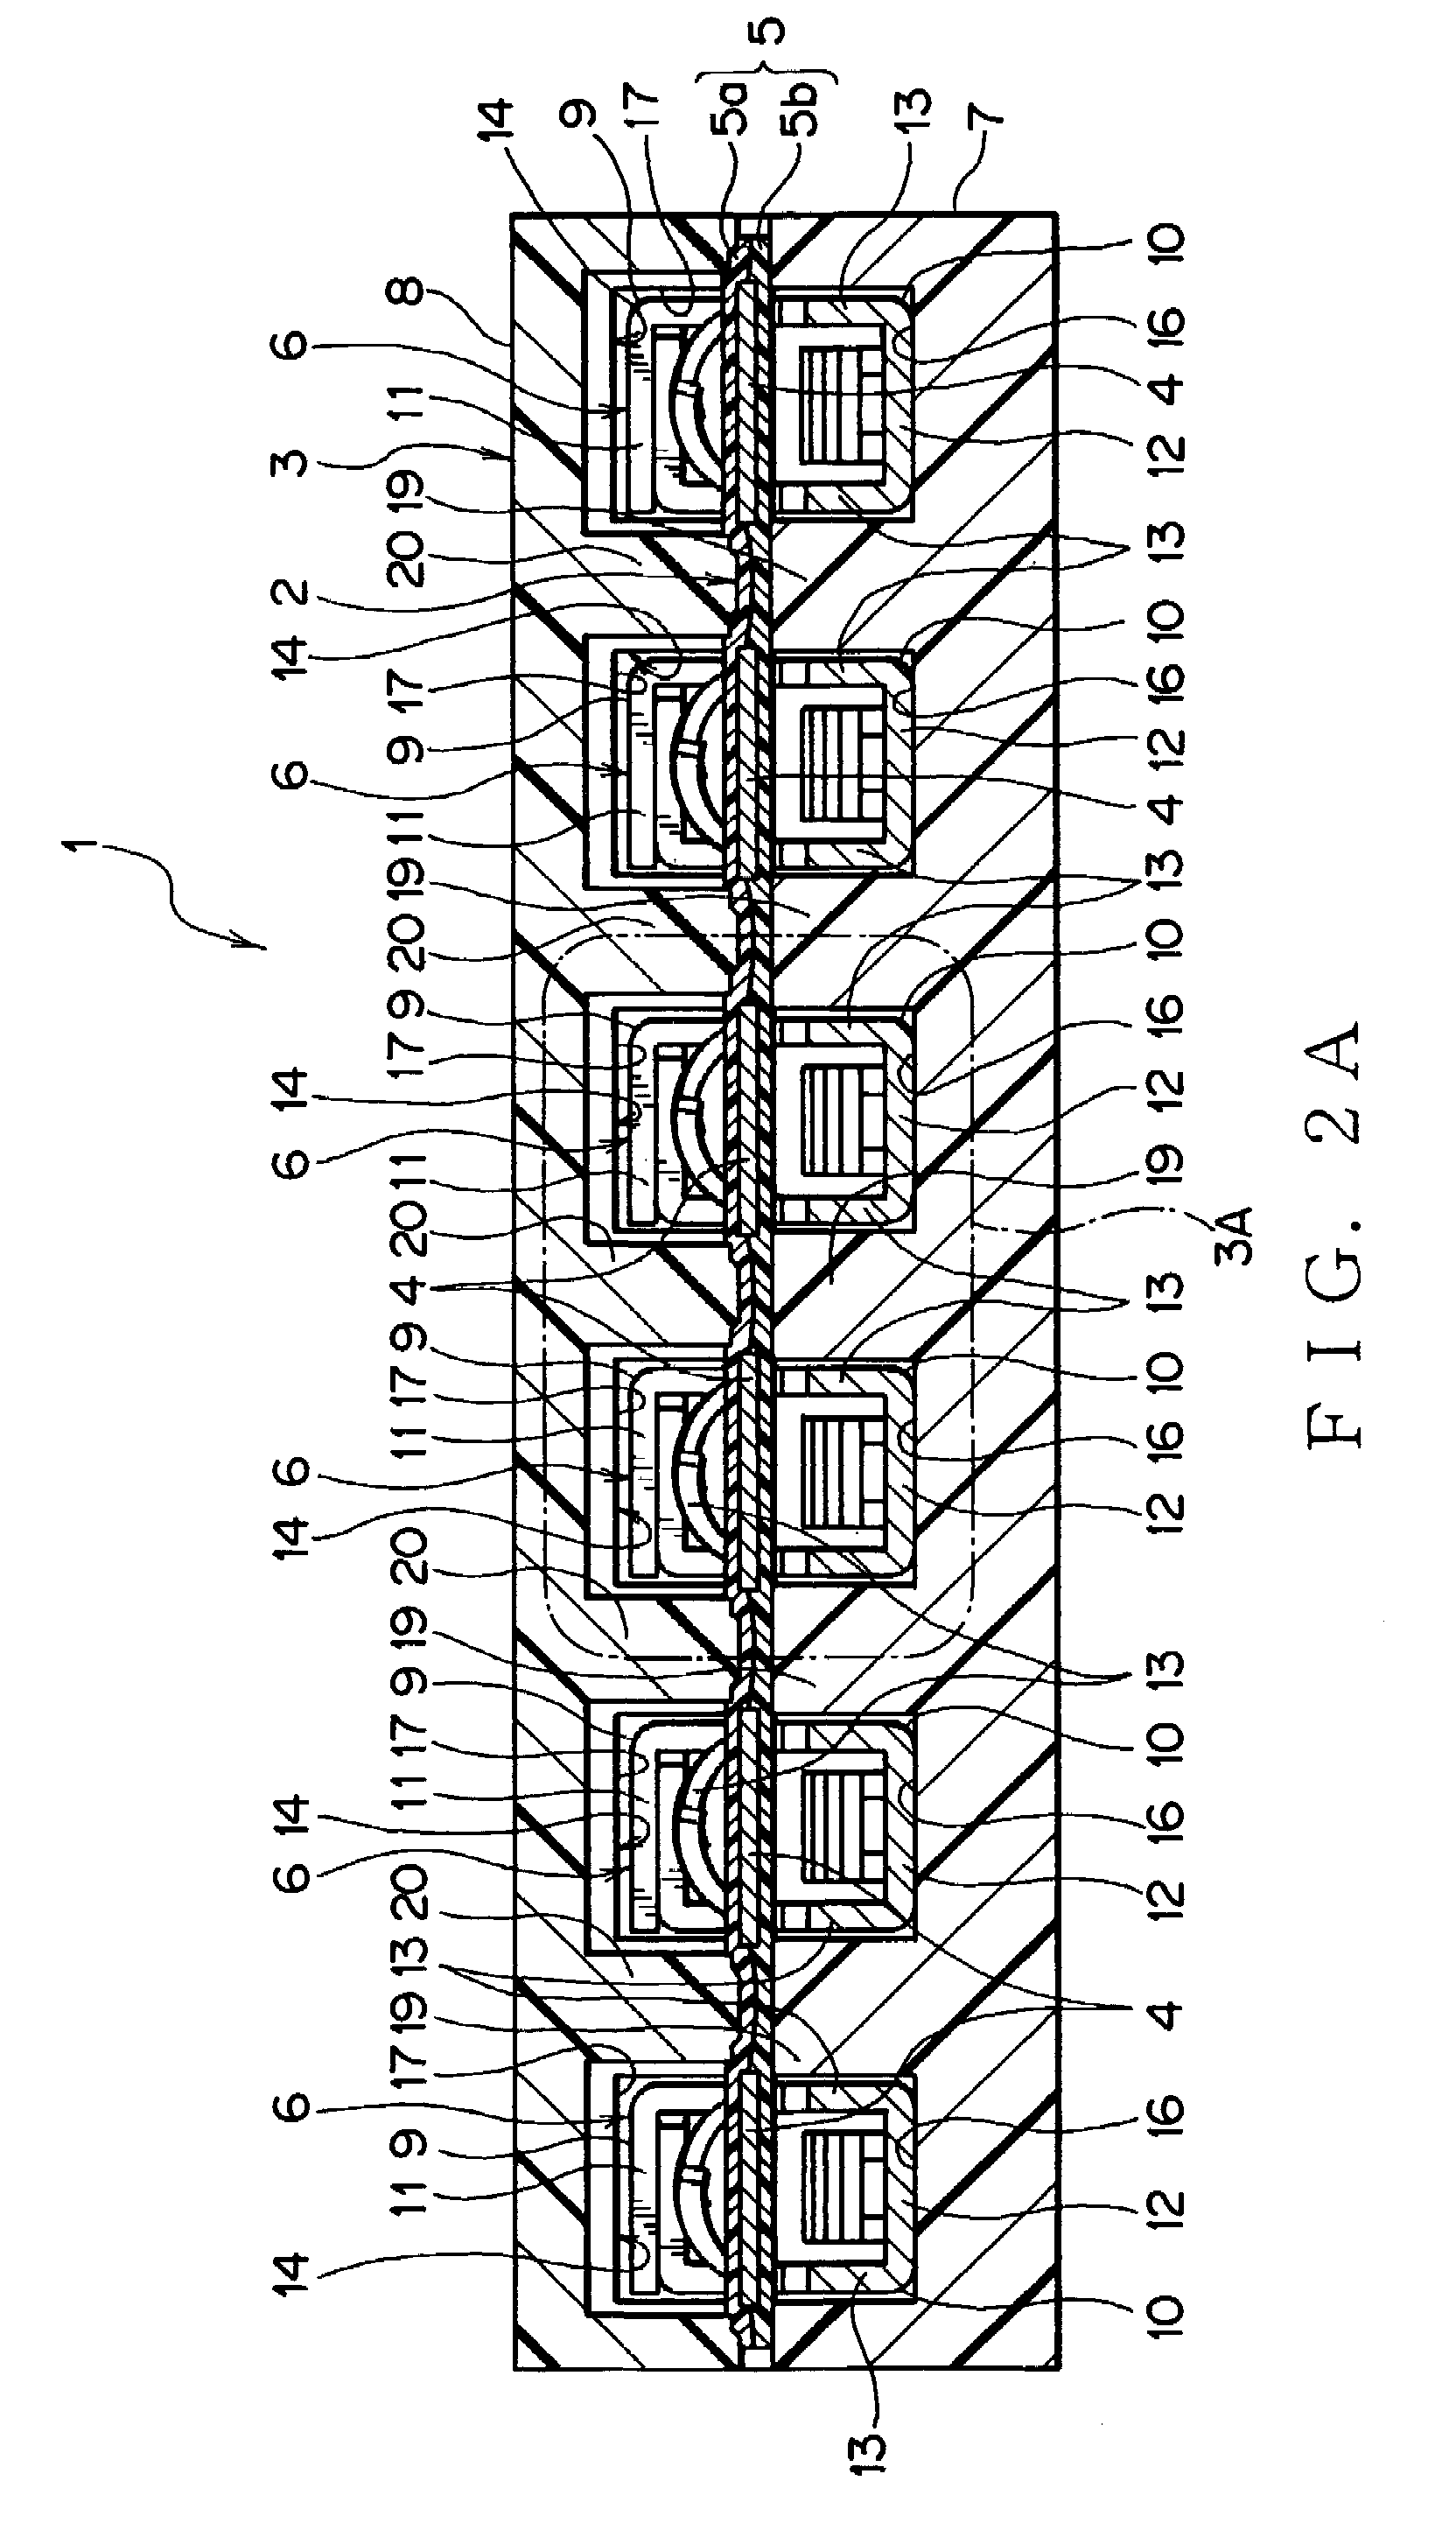 Wiring harness, connector, and method of assembling the wiring harness